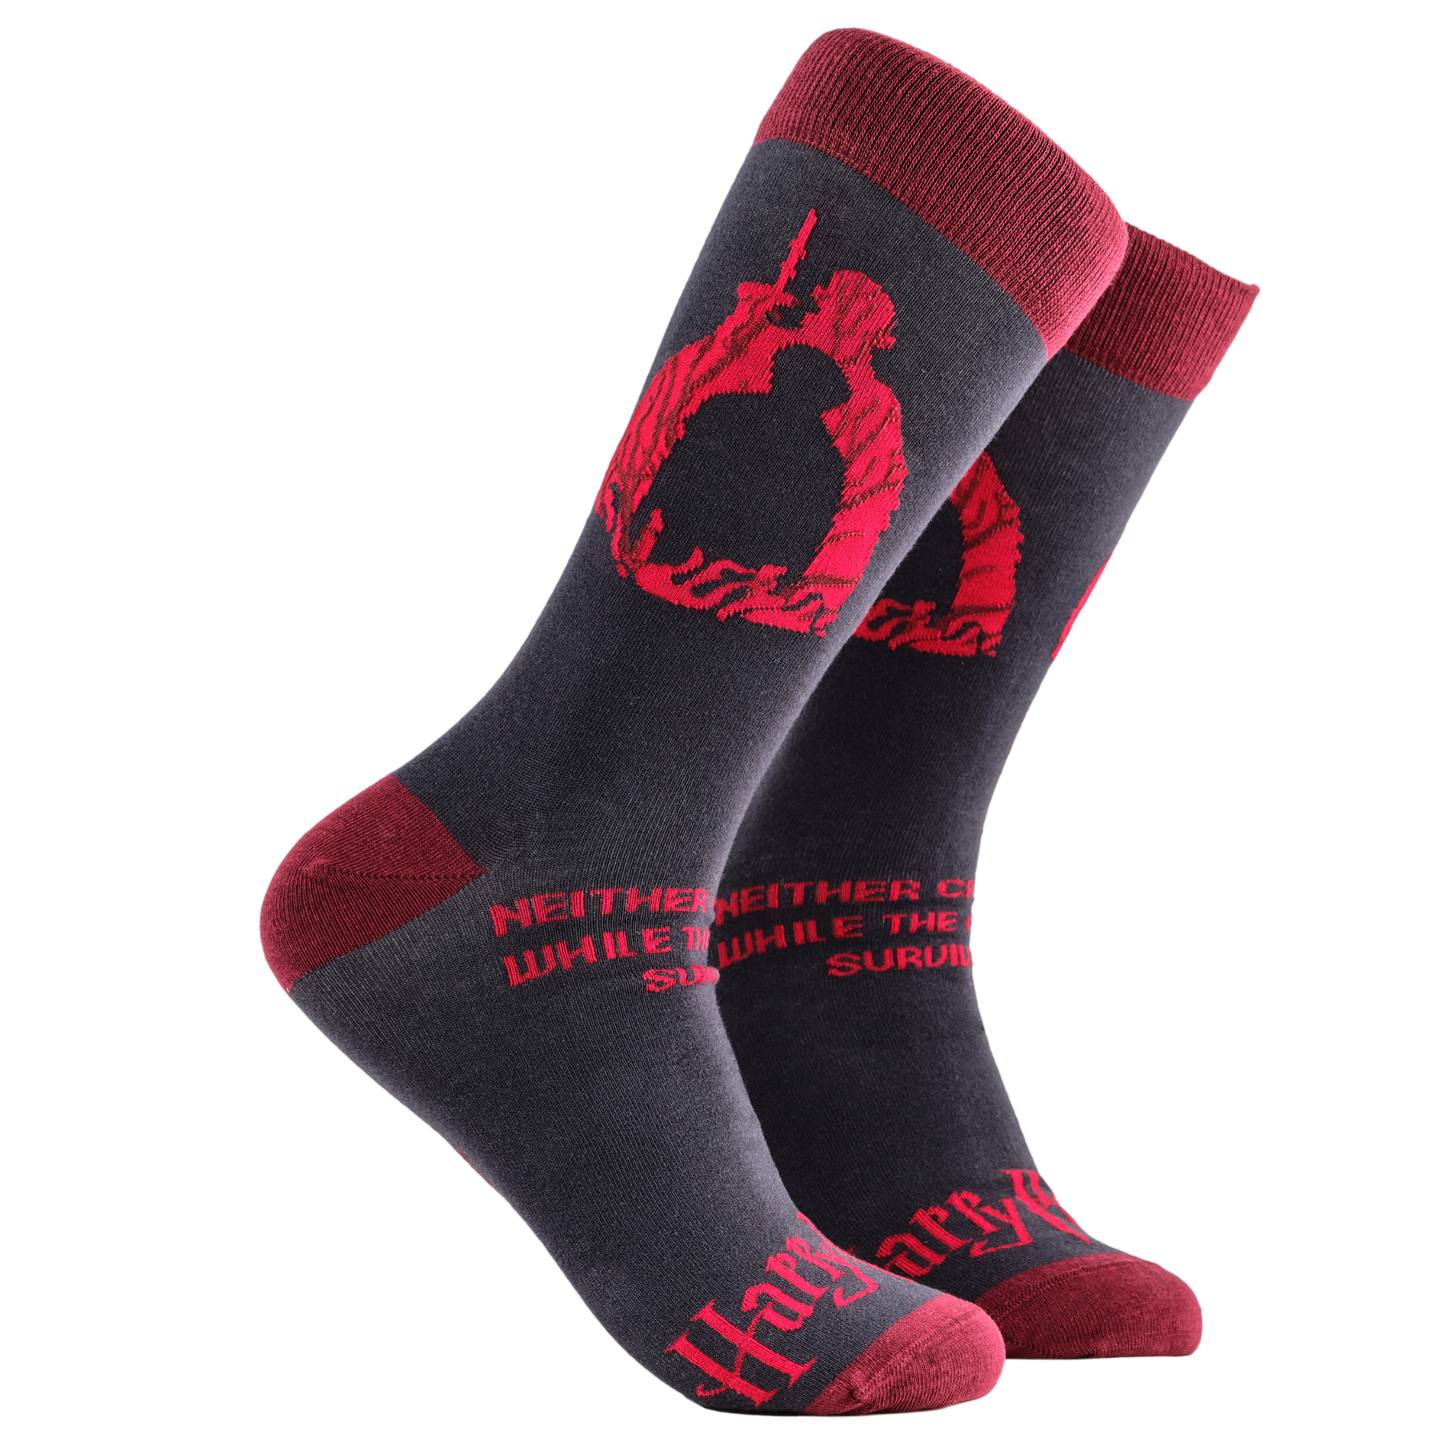 Harry Potter Socks - He Who Must Not Be Named. A pair of socks depicting scenes from Harry Potter. Grey legs, red cuff, heel and toe.